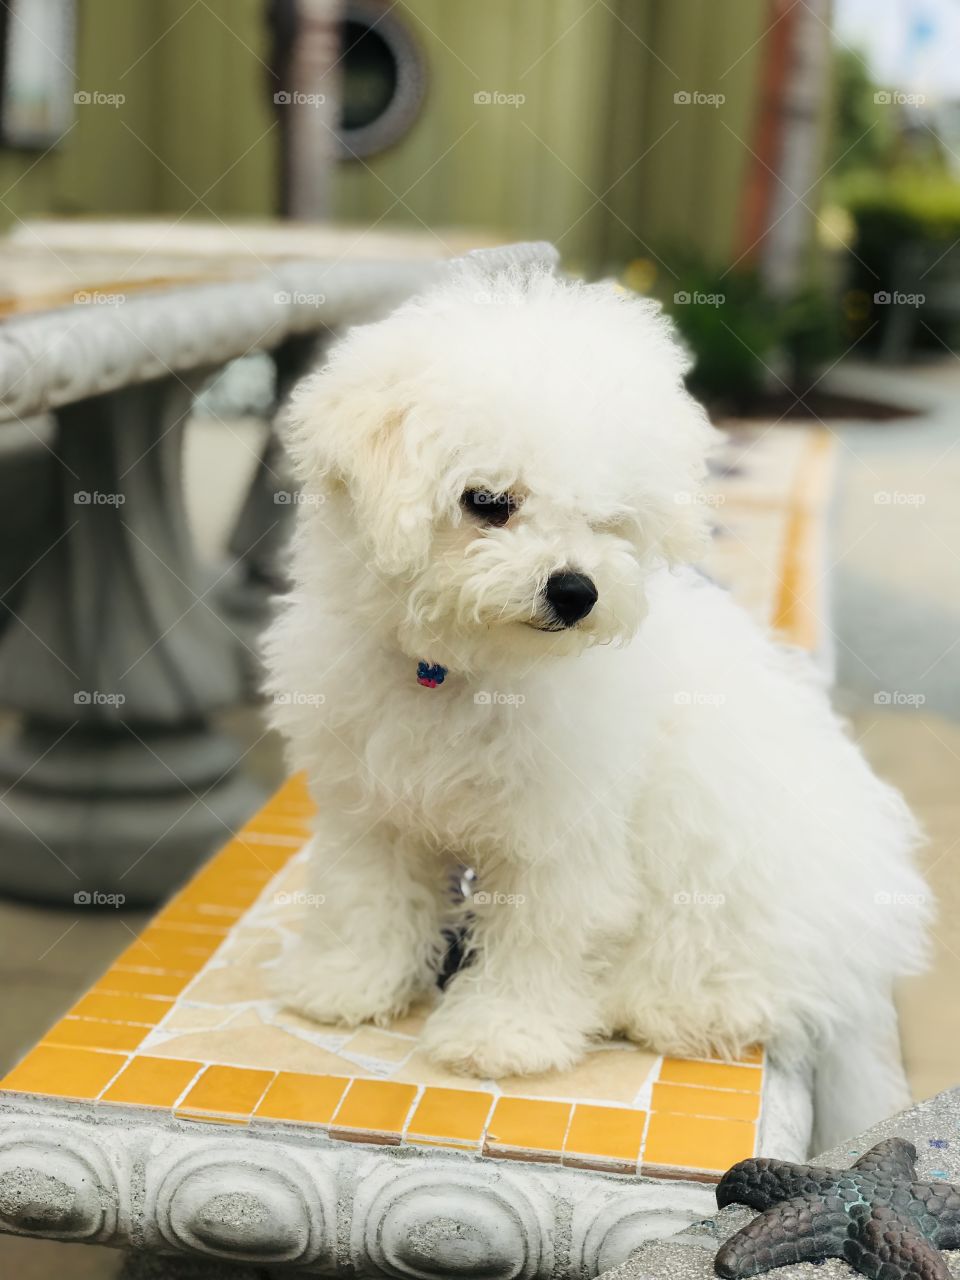 A small white puppy sitting on a cheerful yellow tile bench while looking at a starfish sculpture made of metals. 